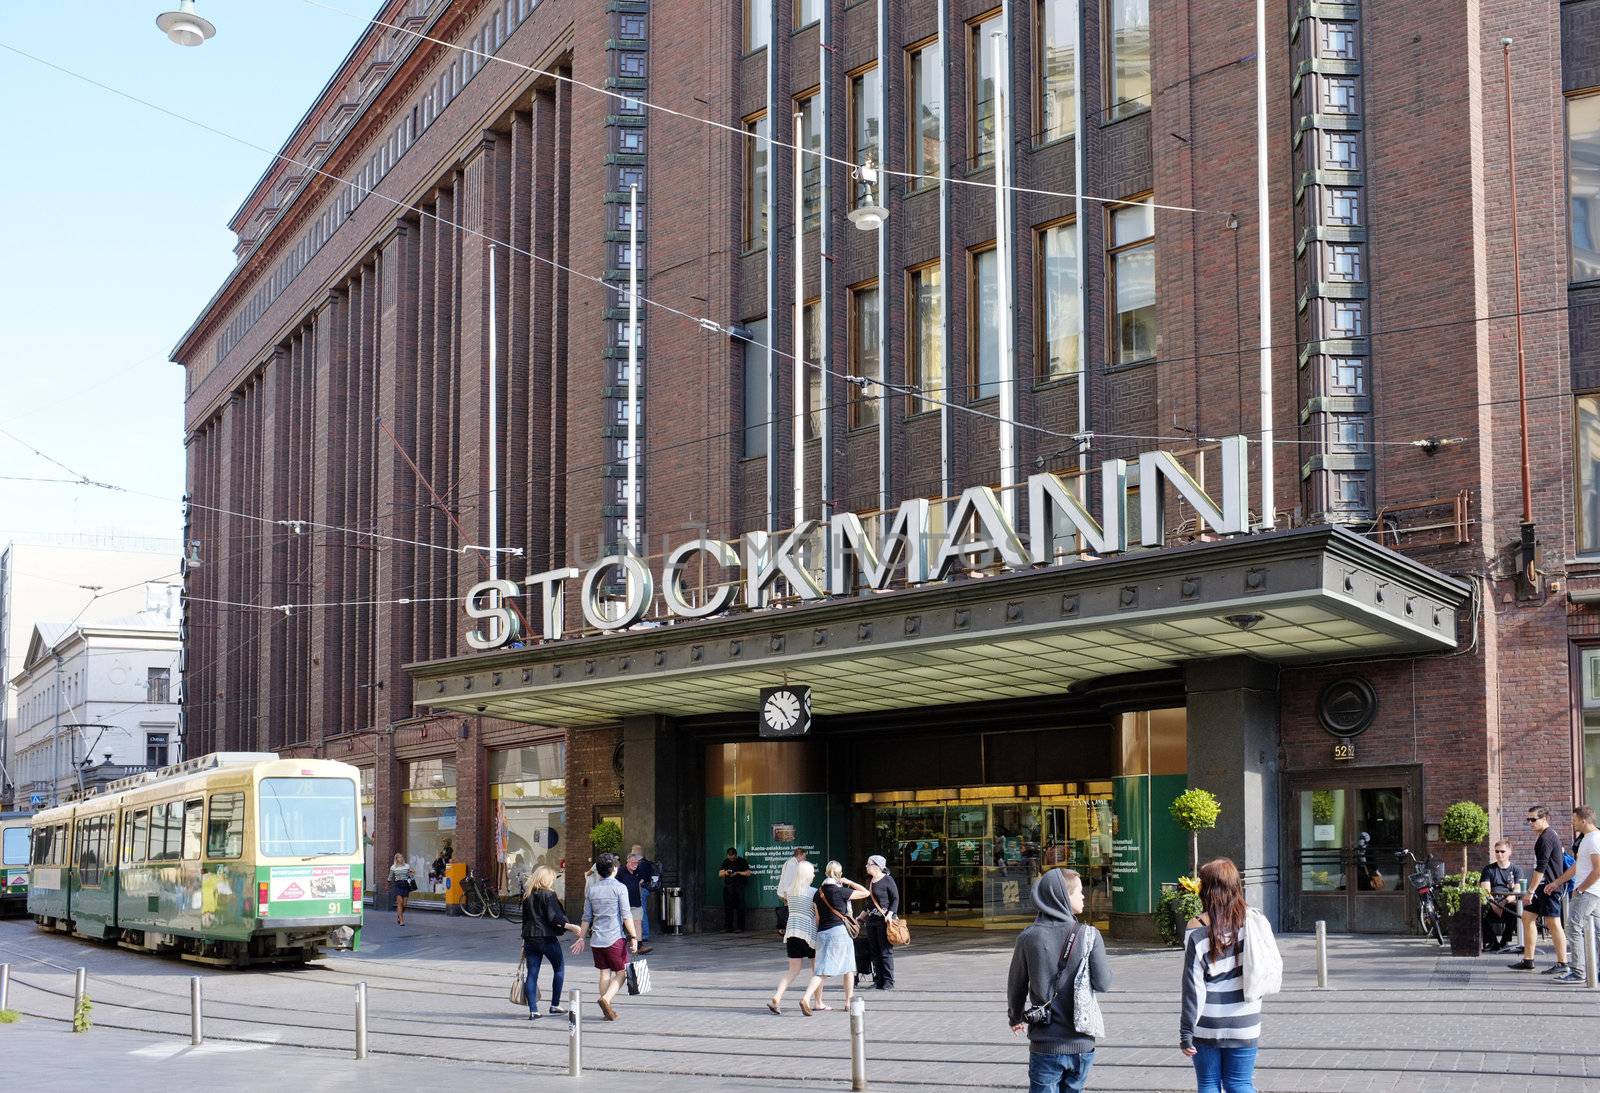 Helsinki, Finland - August 14:  The flagship Stockmann store in the centre of Helsinki. It is the largest department store in the Nordic countries. Stockmann is a Finnish listed company which was established in 1862 and is engaged in the retail trade. August 14, 2011 in Helsinki, Finland